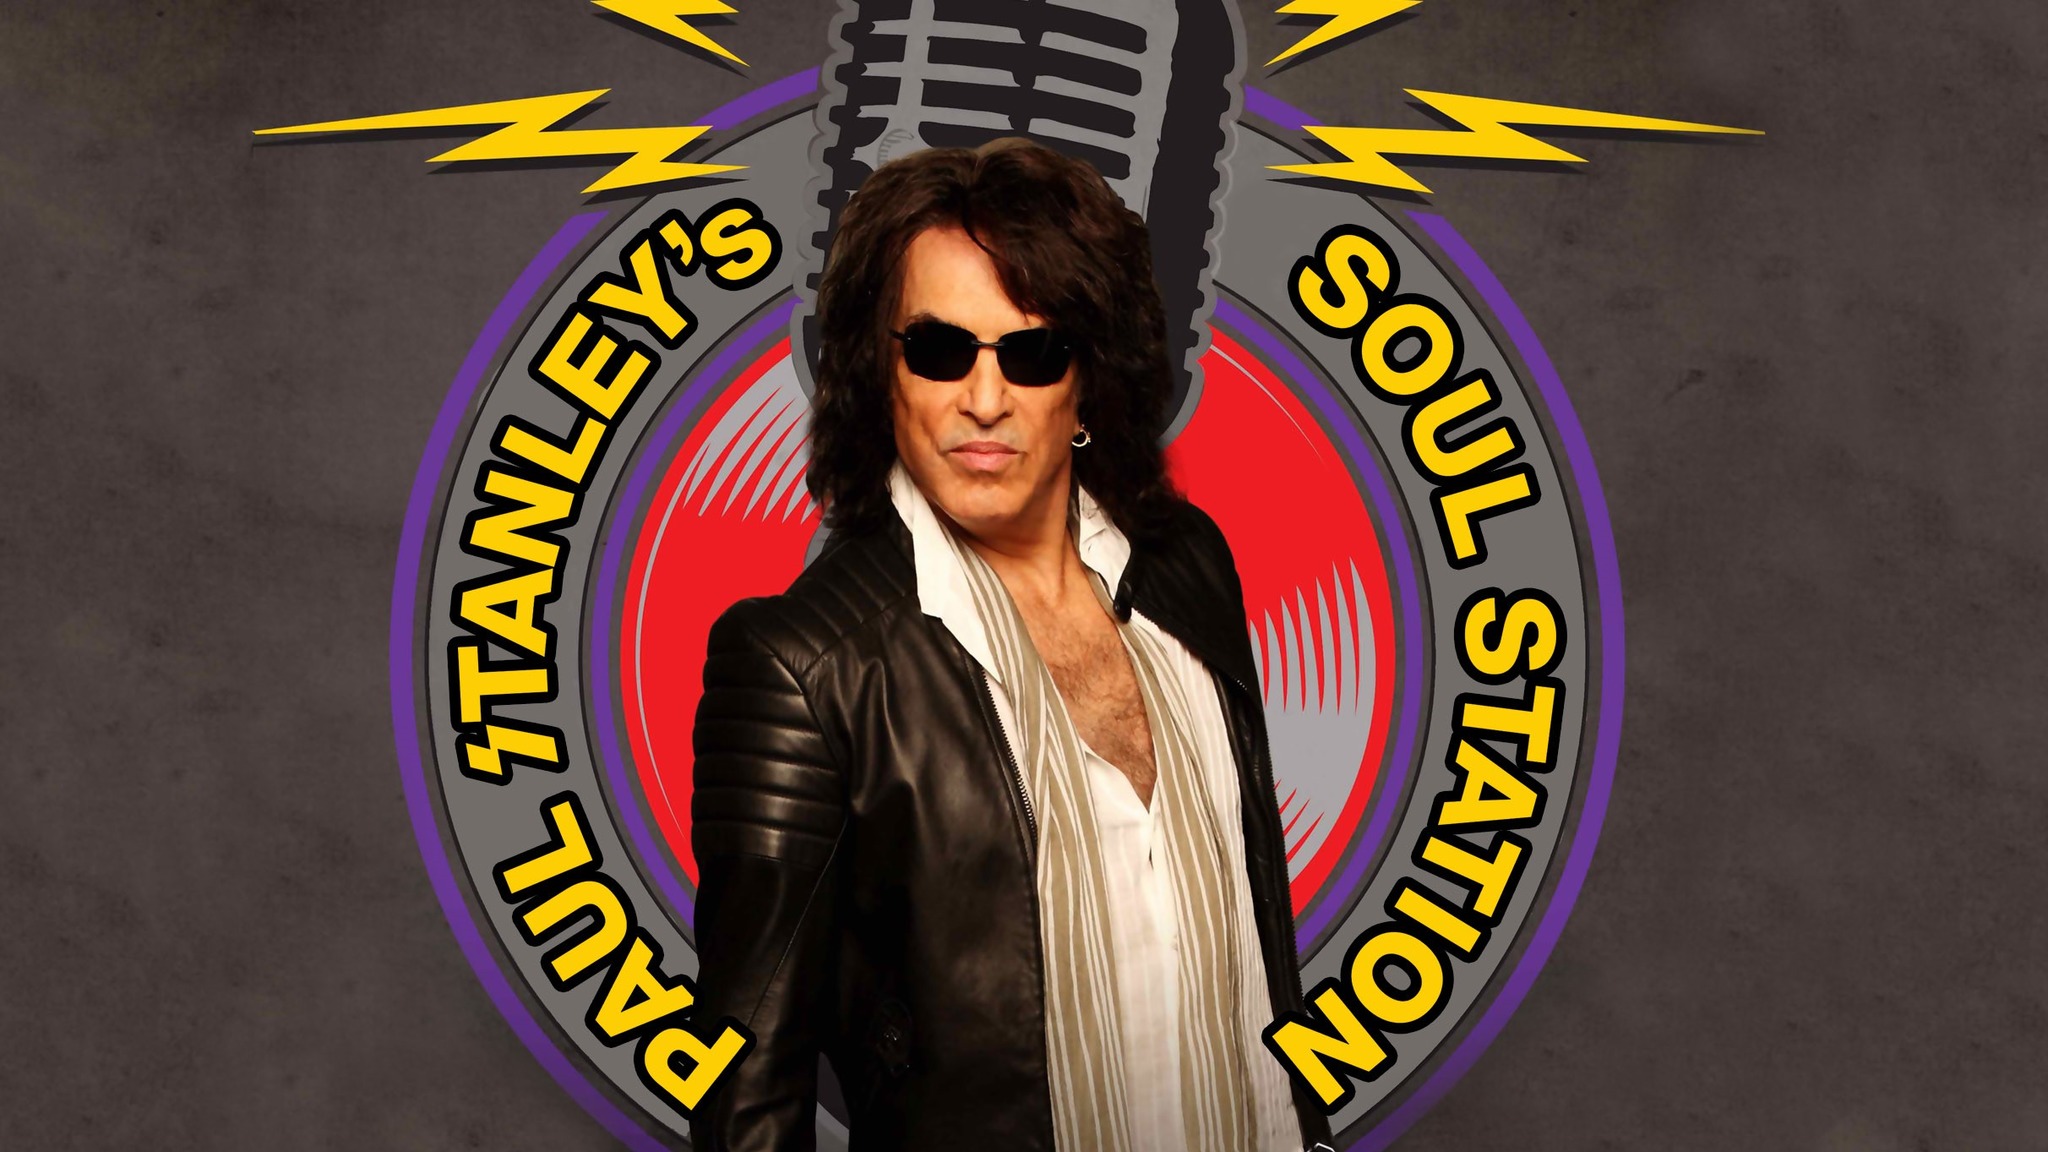 PAUL STANLEY’S SOUL STATION – “NOW AND THEN” in uscita il 5 marzo 2021